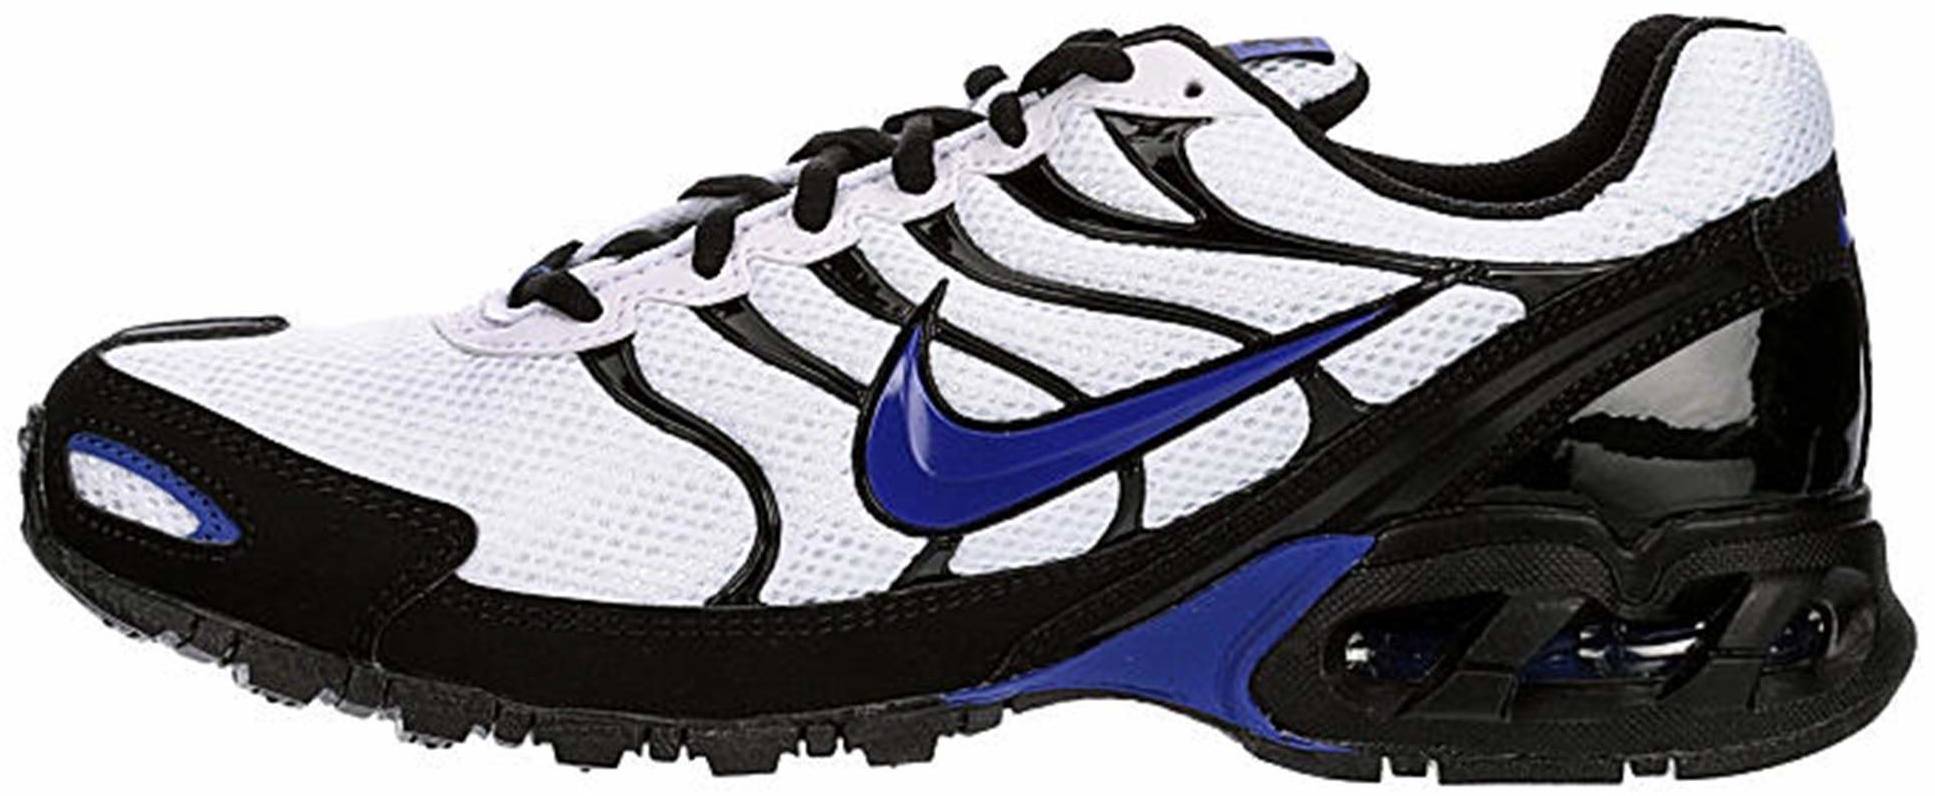 nike men's air max torch 4 running shoes stores